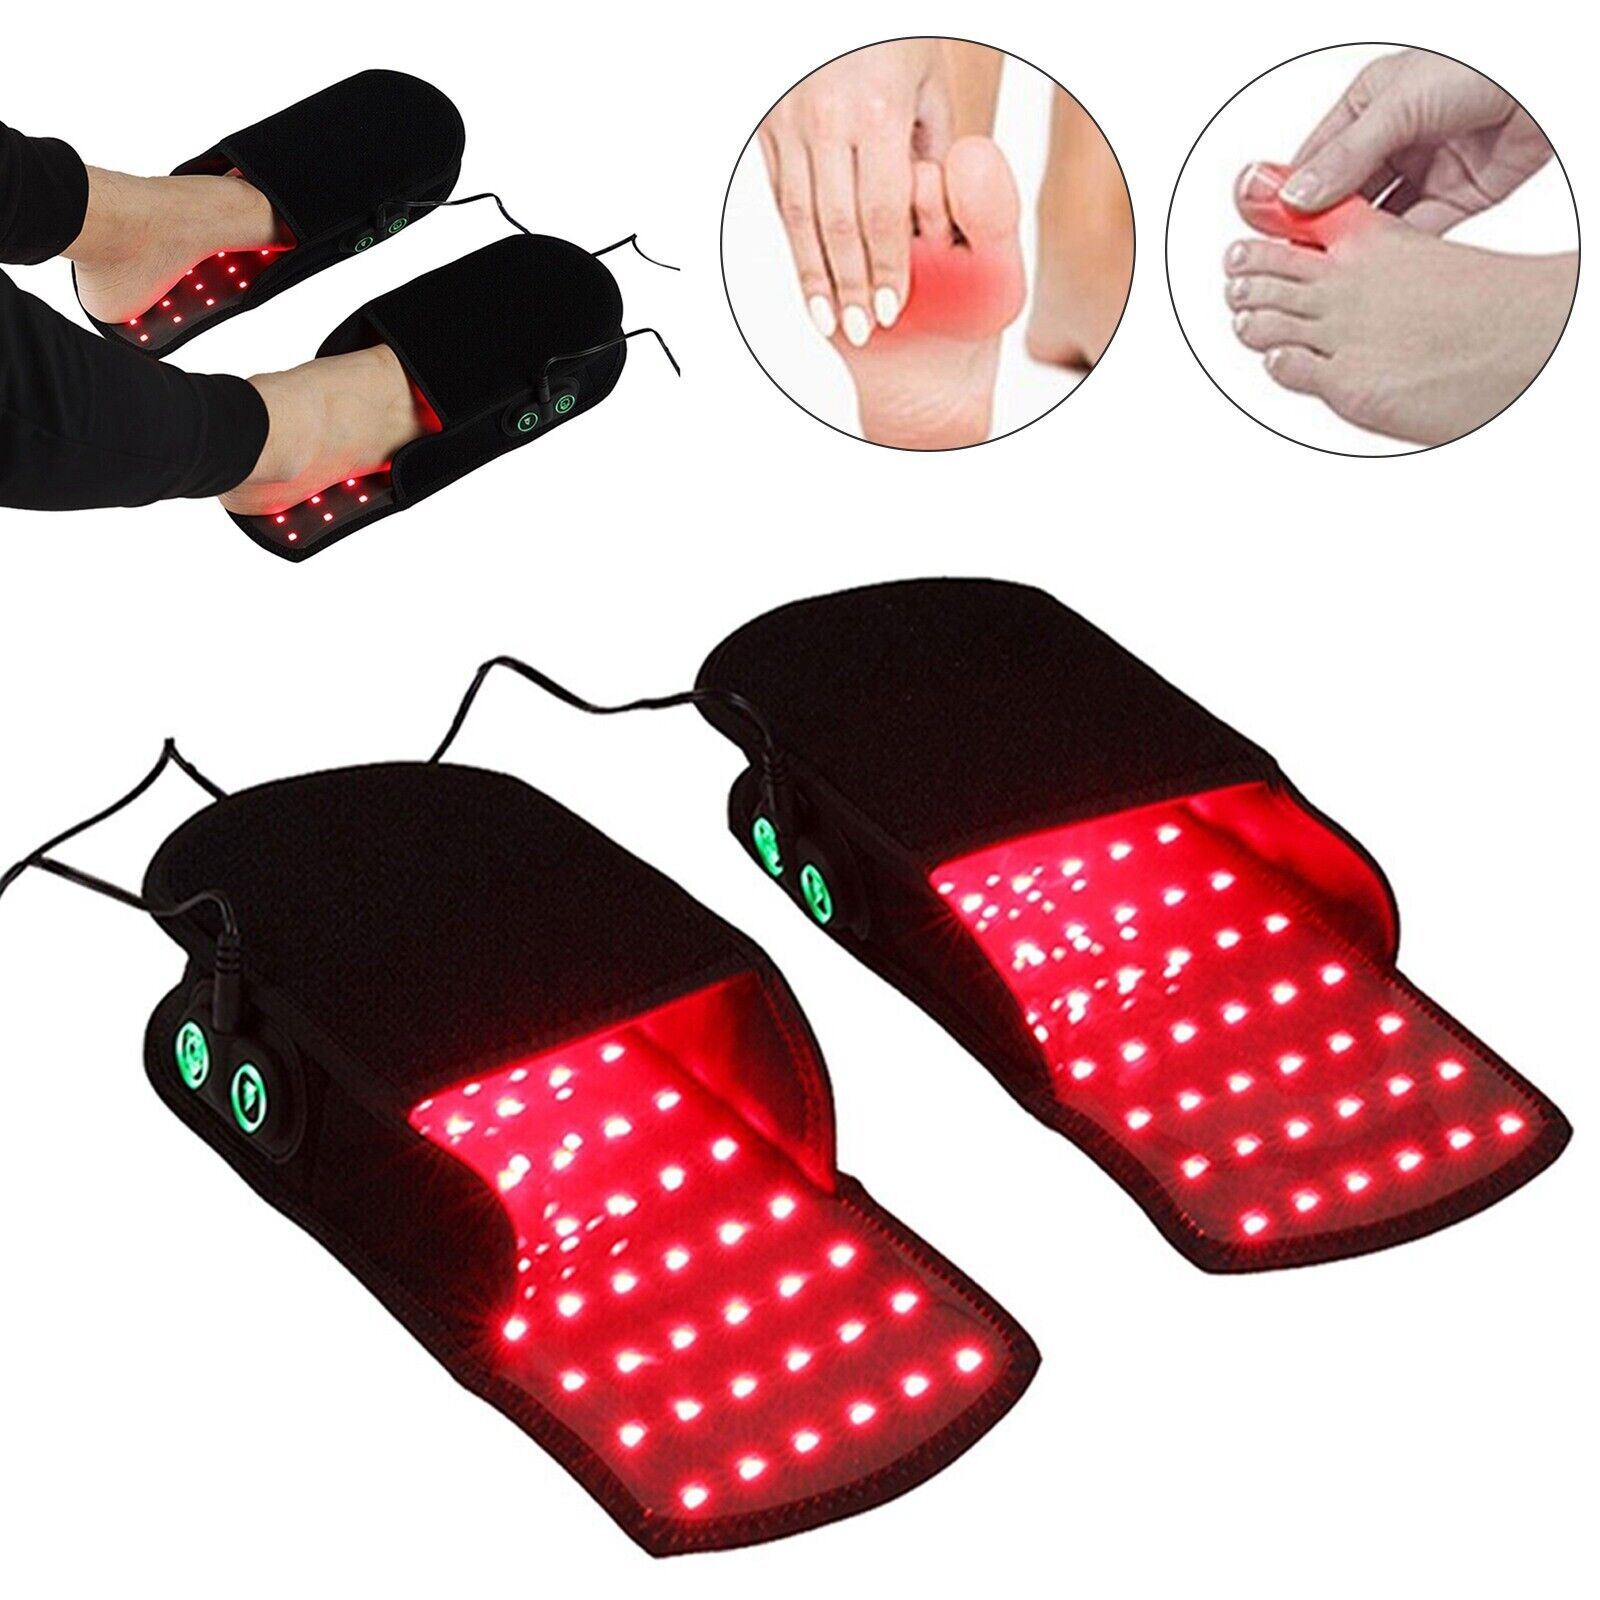 LED Infrared Red Light Therapy Slippers for Foot Neuropathy Joint Pain Relief a